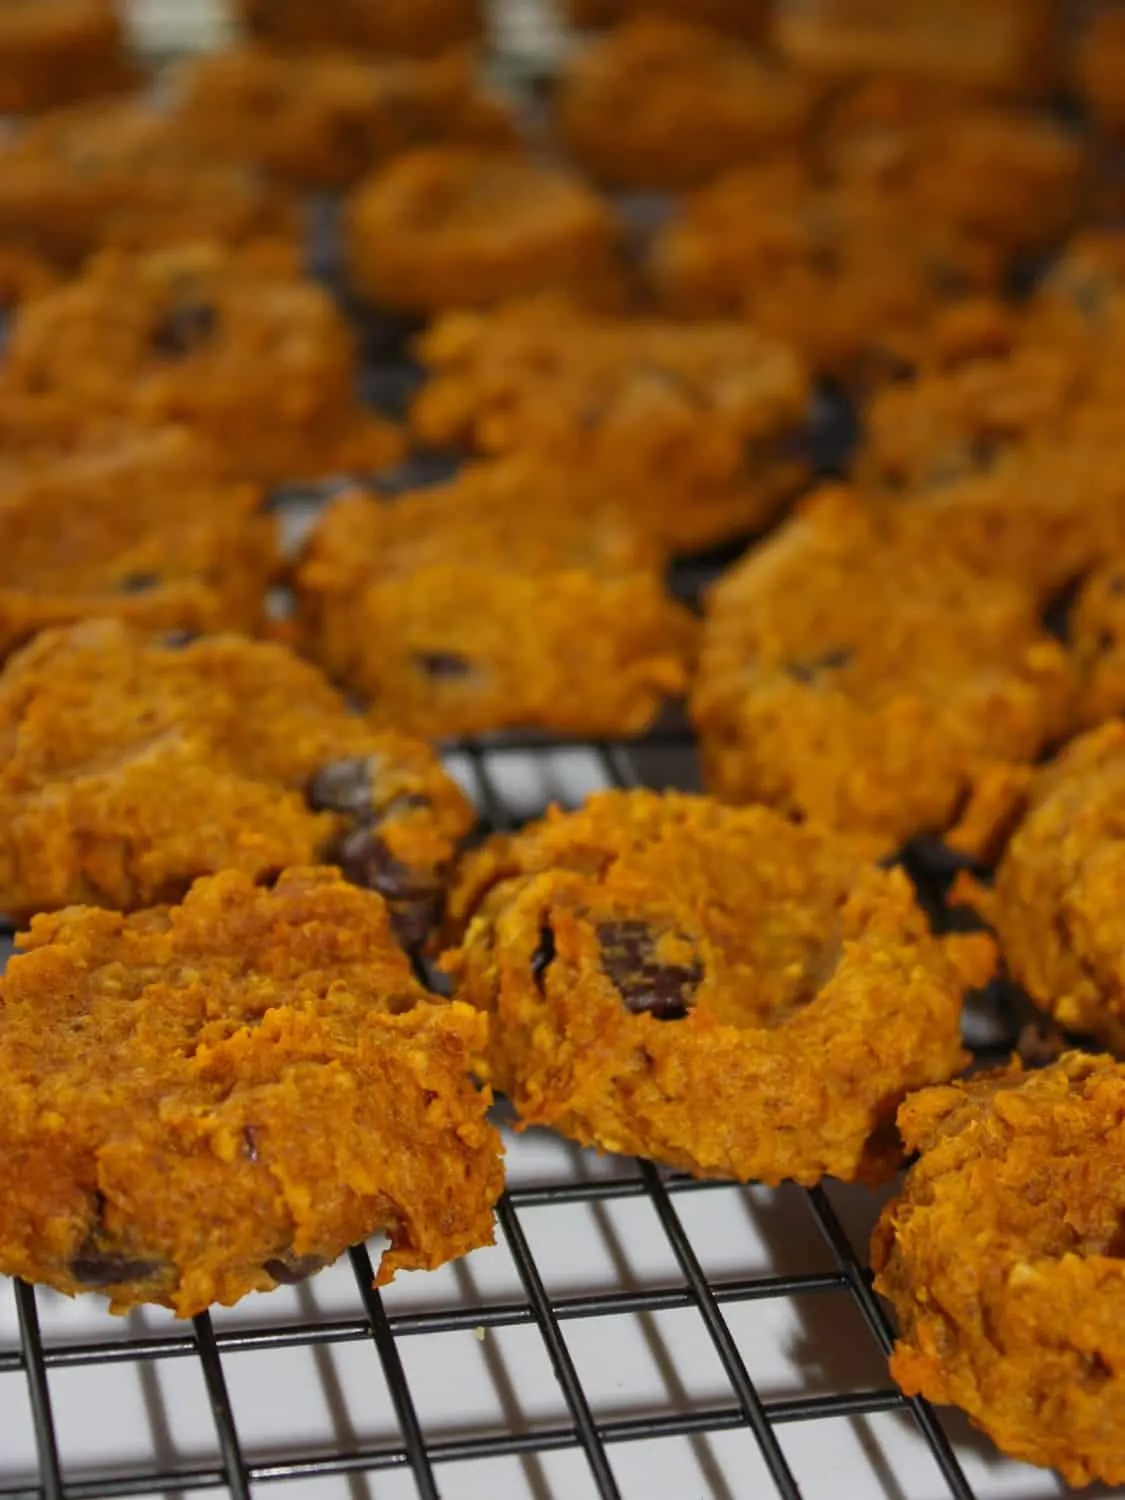 As fall rains turn to snow I am just about done with pumpkin recipes.  These Pumpkin Cookies include the flavours of fall without overdoing the sweetness.